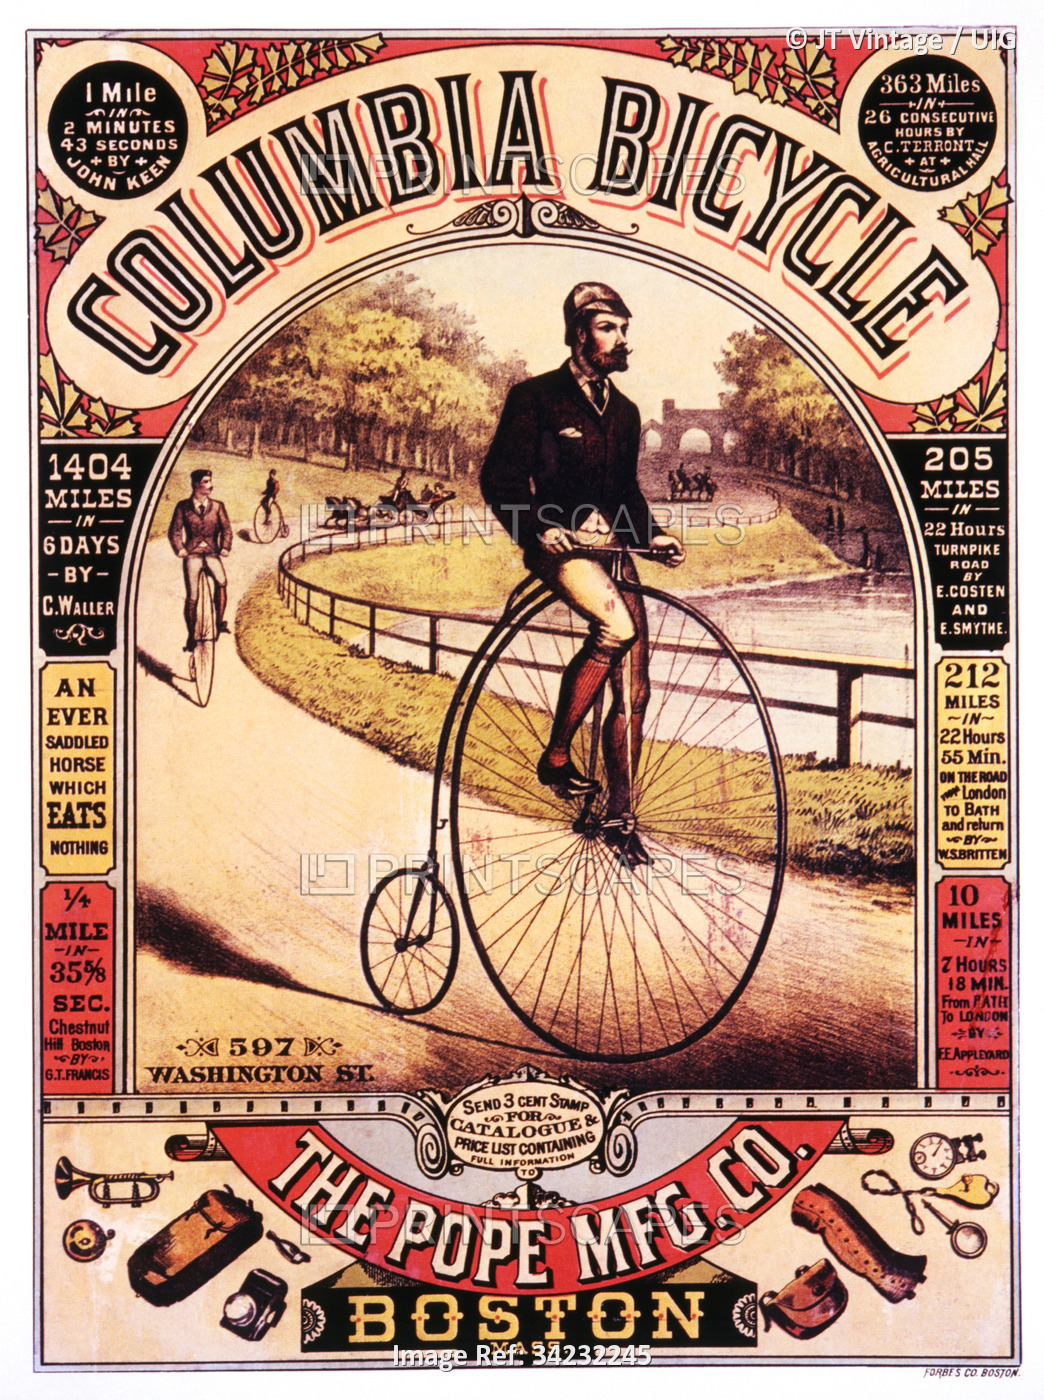 Advertisement for Bicycles, "Columbia Bicycle, The Pope Mfg. Company Boston, ...